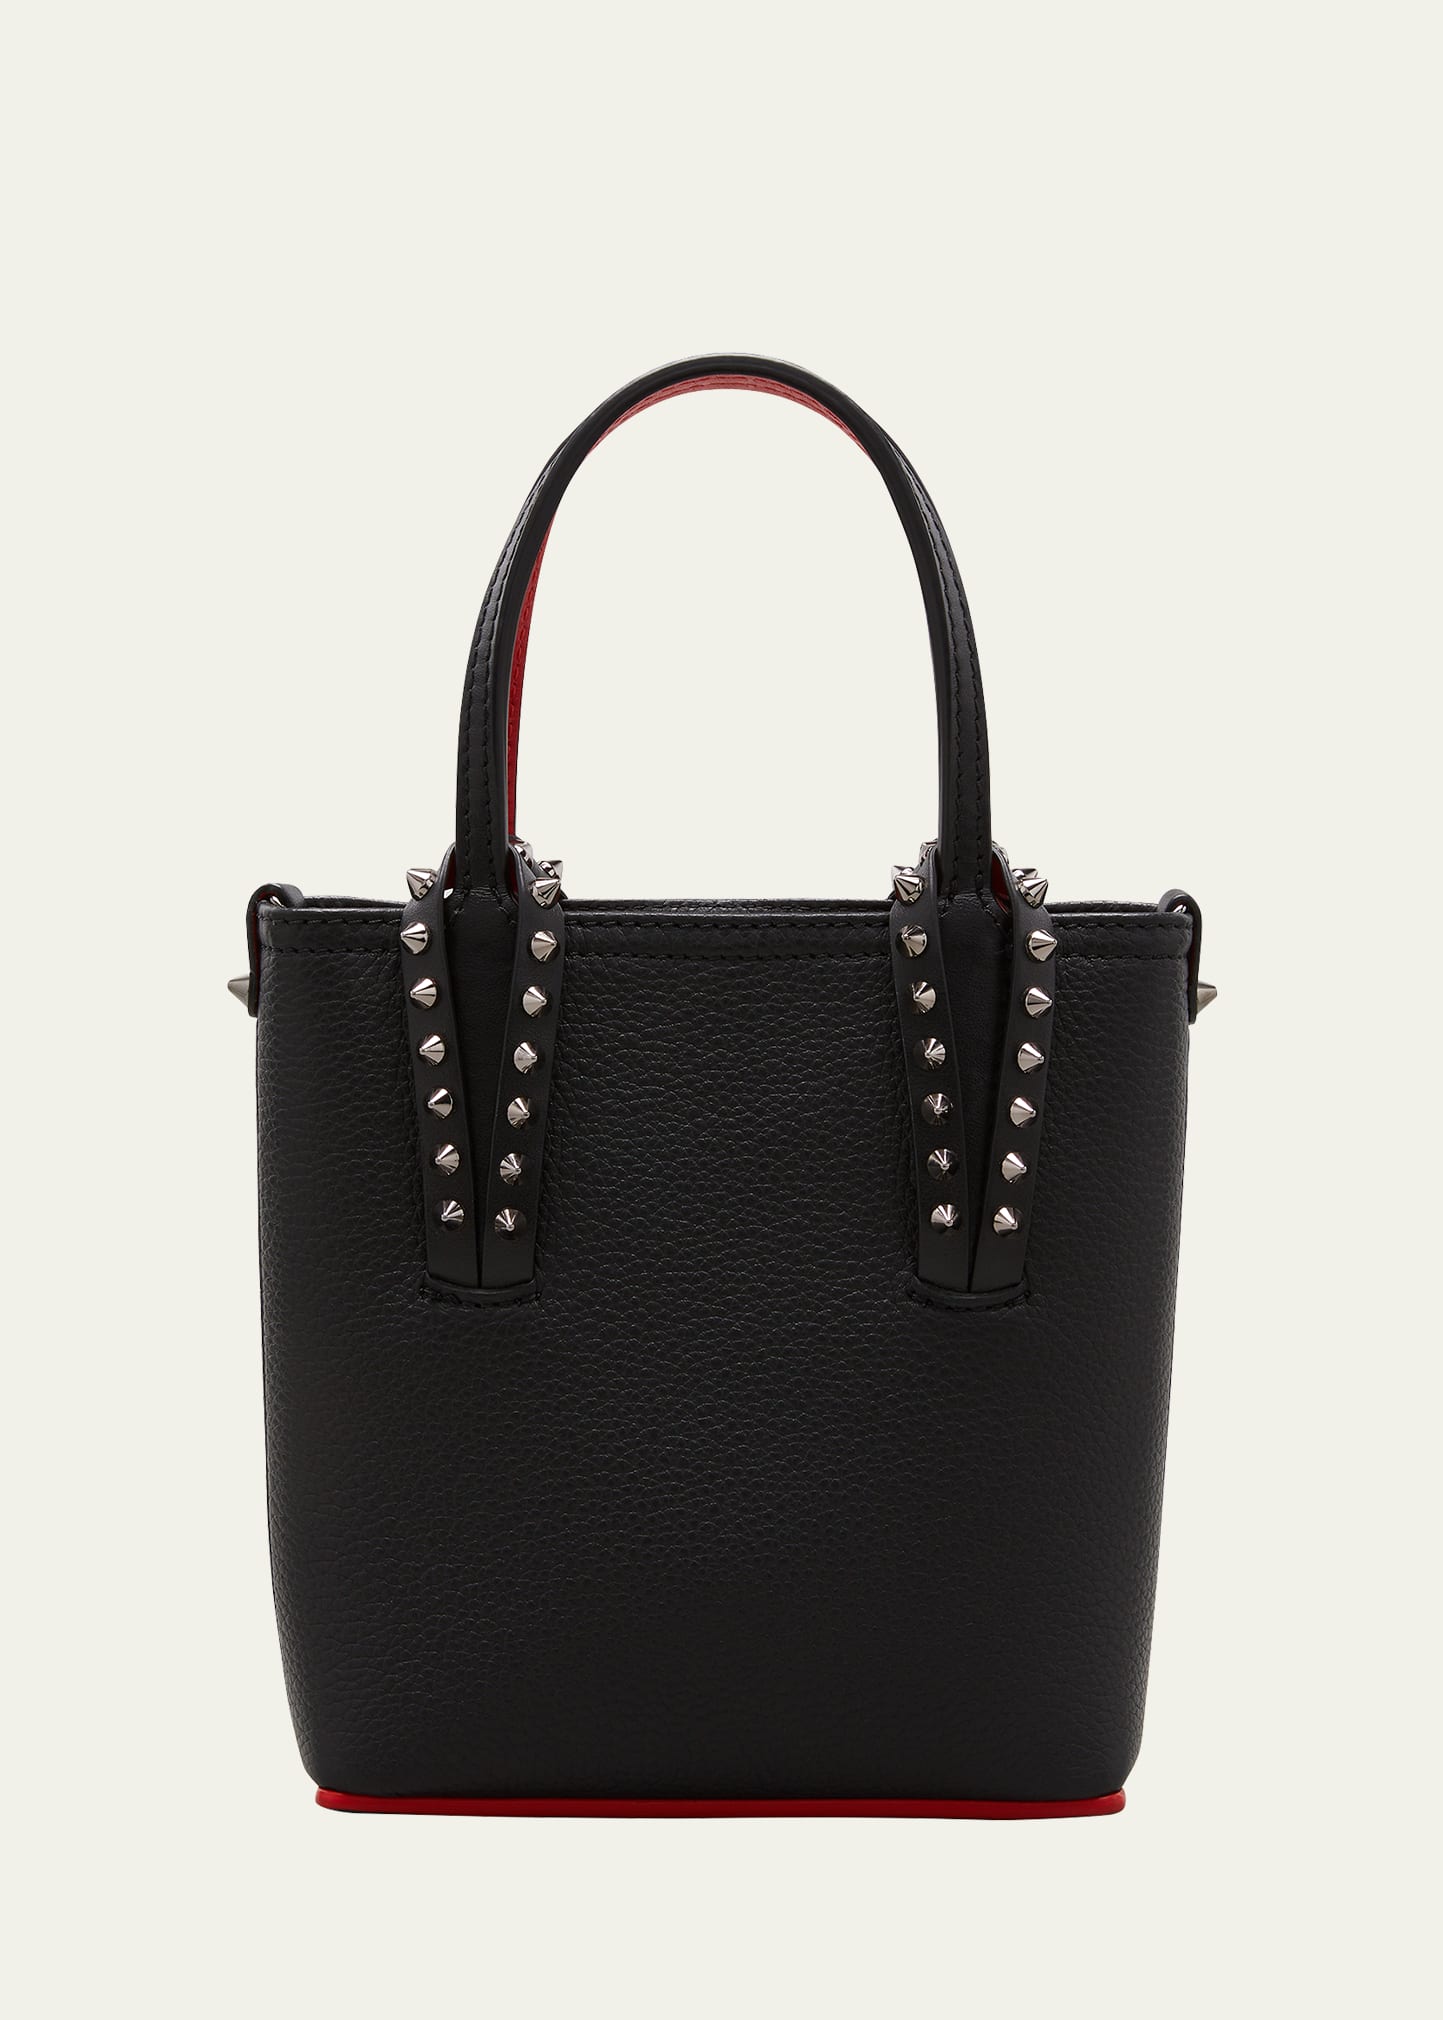 Cabata N/S Mini Tote in Grained Leather